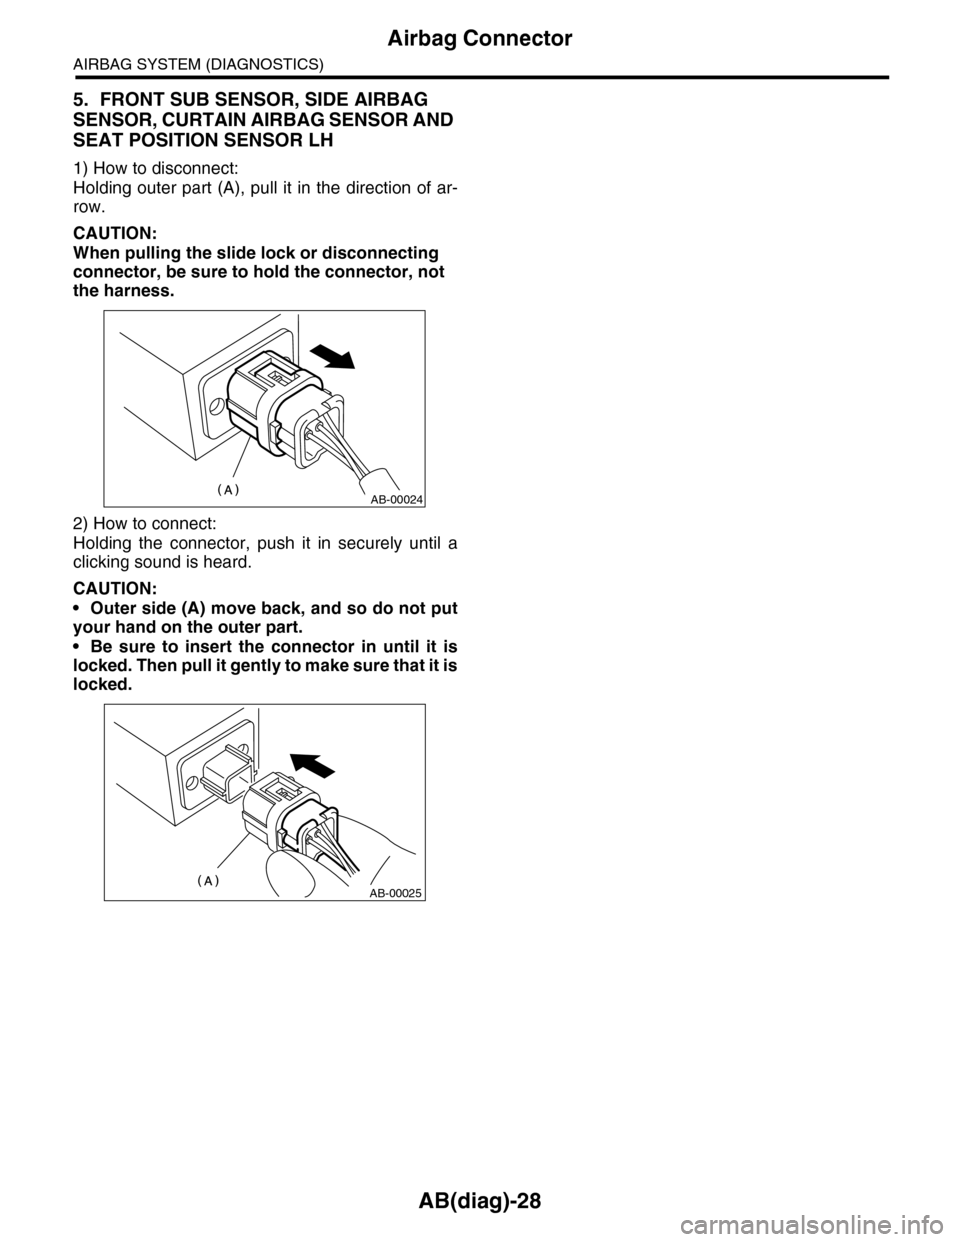 SUBARU TRIBECA 2009 1.G Service Owners Manual AB(diag)-28
Airbag Connector
AIRBAG SYSTEM (DIAGNOSTICS)
5. FRONT SUB SENSOR, SIDE AIRBAG 
SENSOR, CURTAIN AIRBAG SENSOR AND 
SEAT POSITION SENSOR LH
1) How to disconnect:
Holding outer part (A), pull